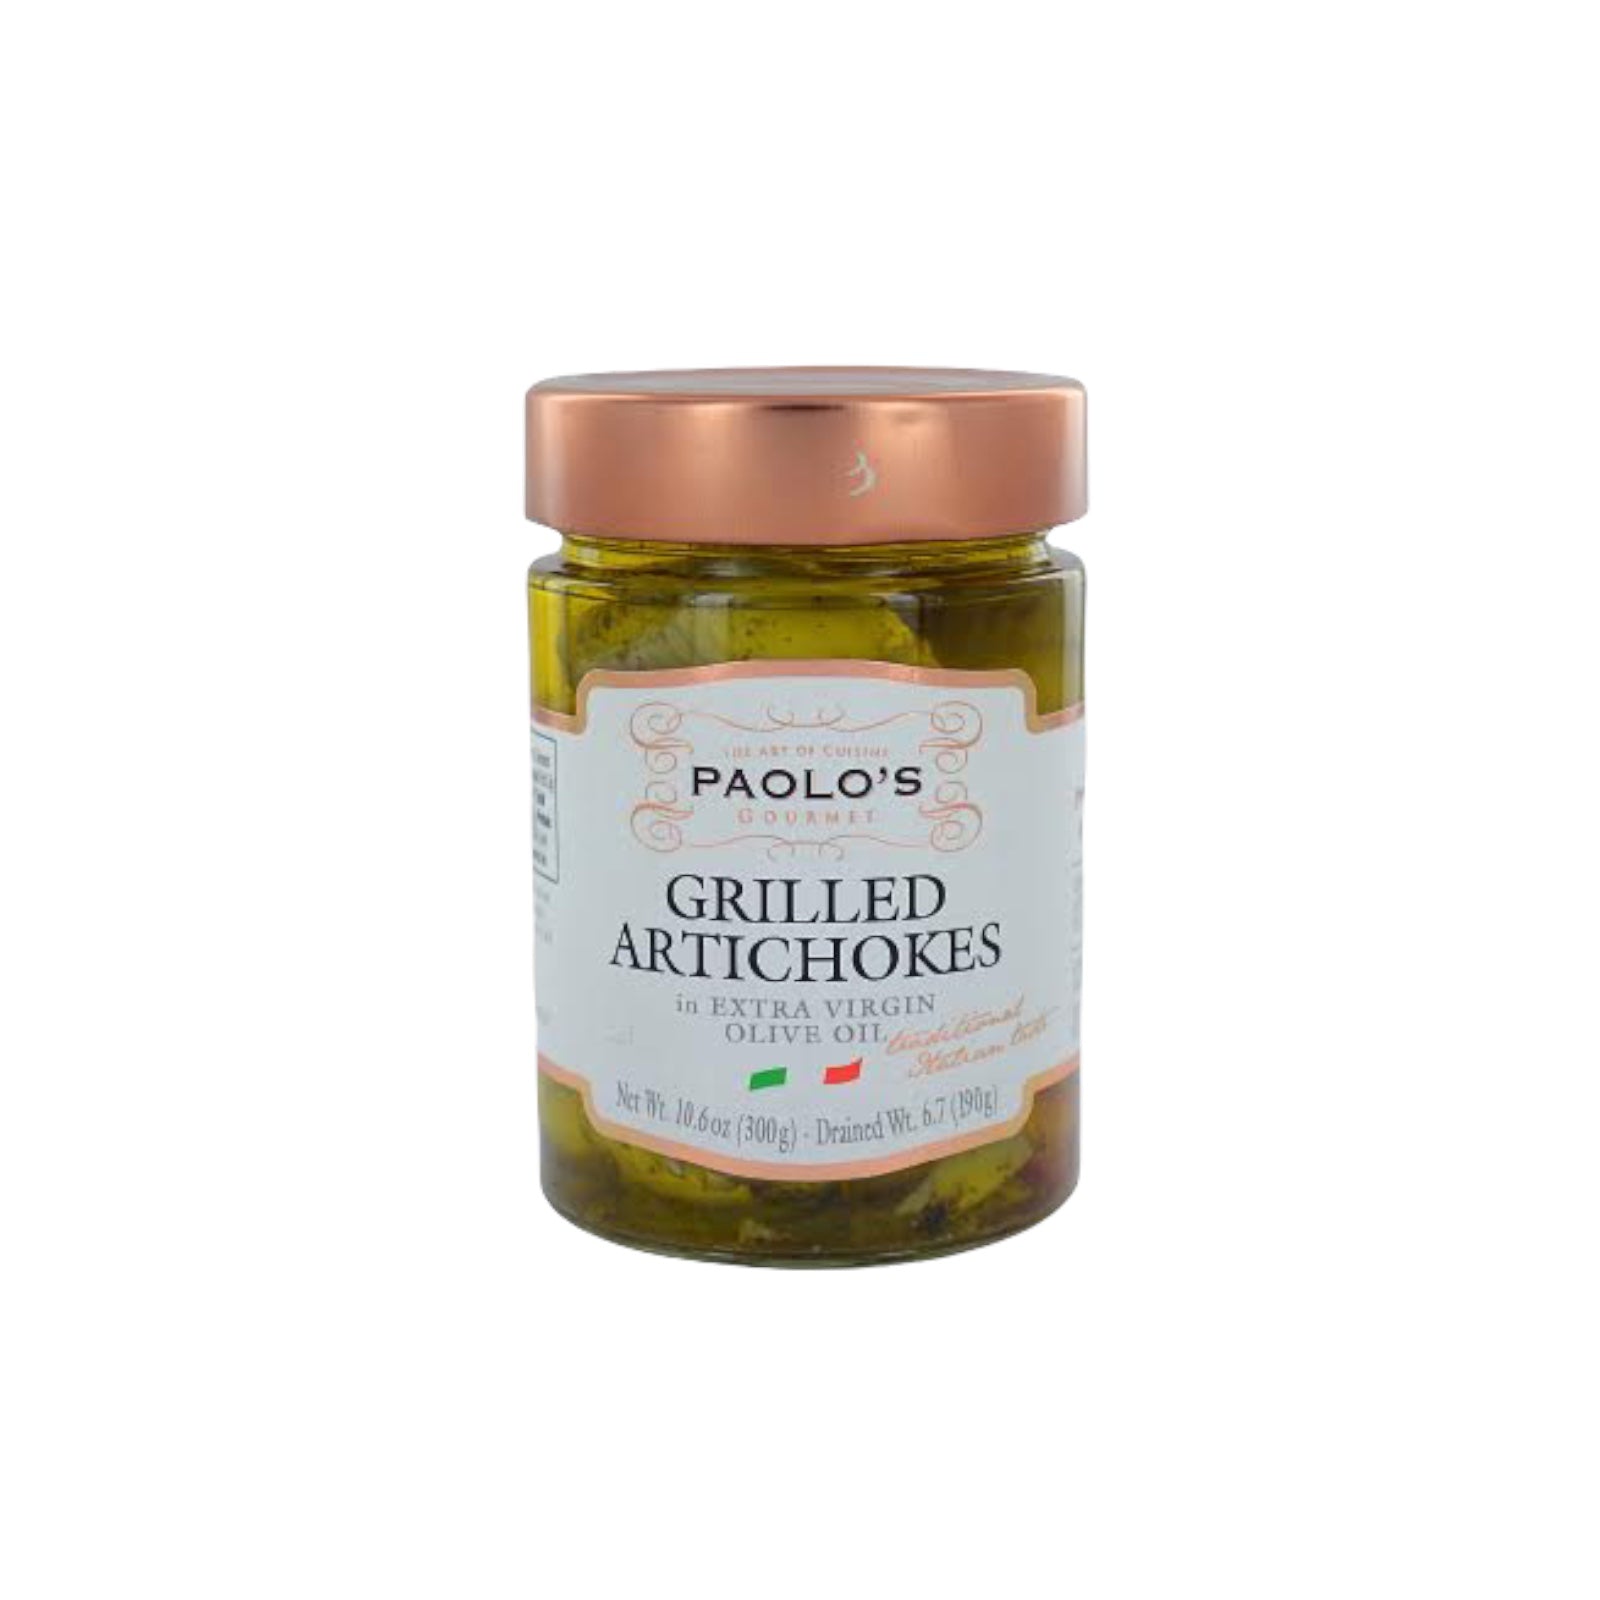 Paolo’s Grilled Artichokes In Olive Oil